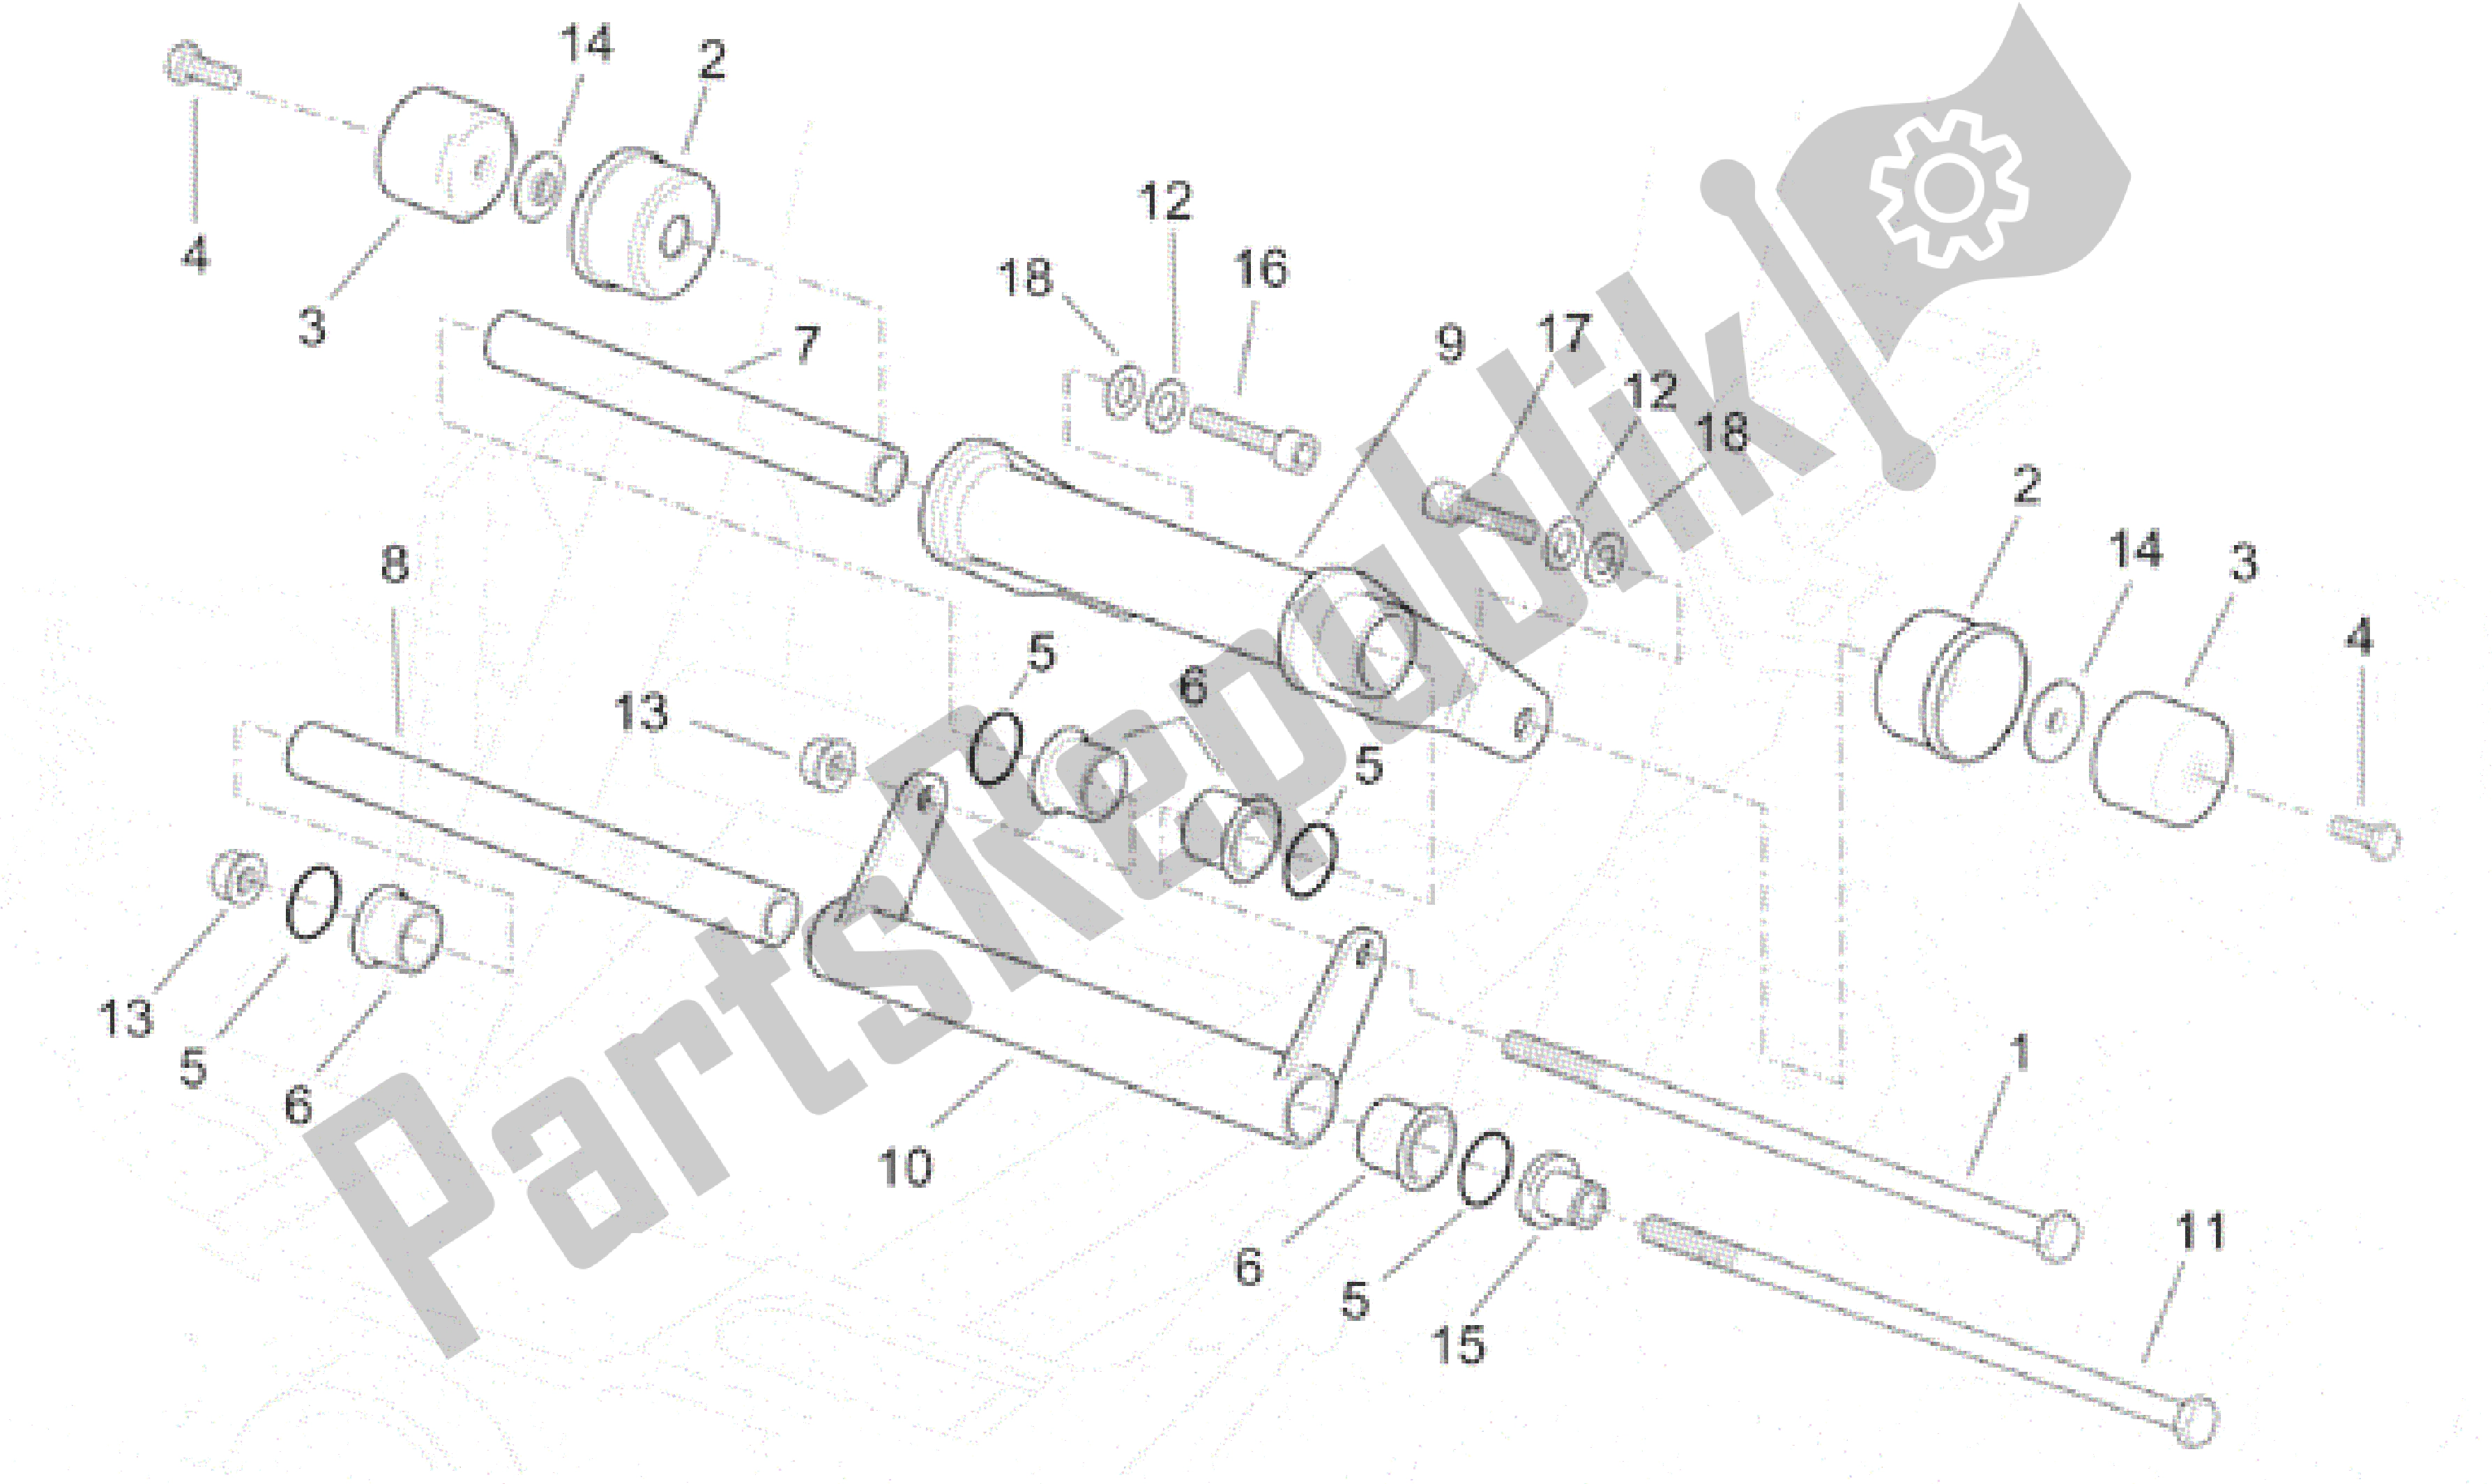 All parts for the Connecting Rod of the Aprilia SR 150 1999 - 2001